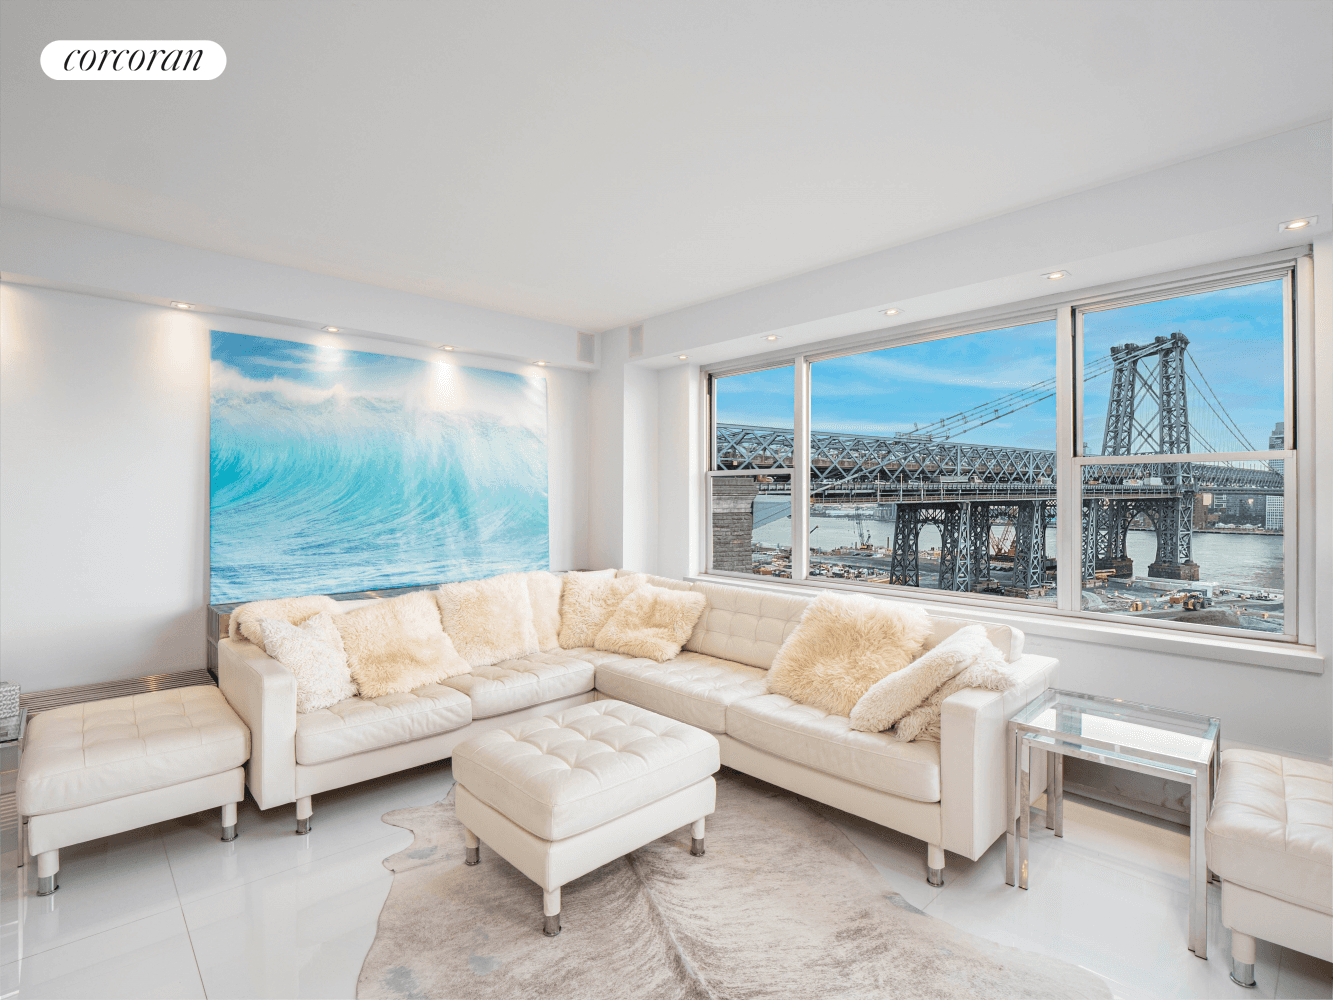 Don't miss this exceptional, professionally designed, and renovated two bedroom apartment with stunning bridge and river views.